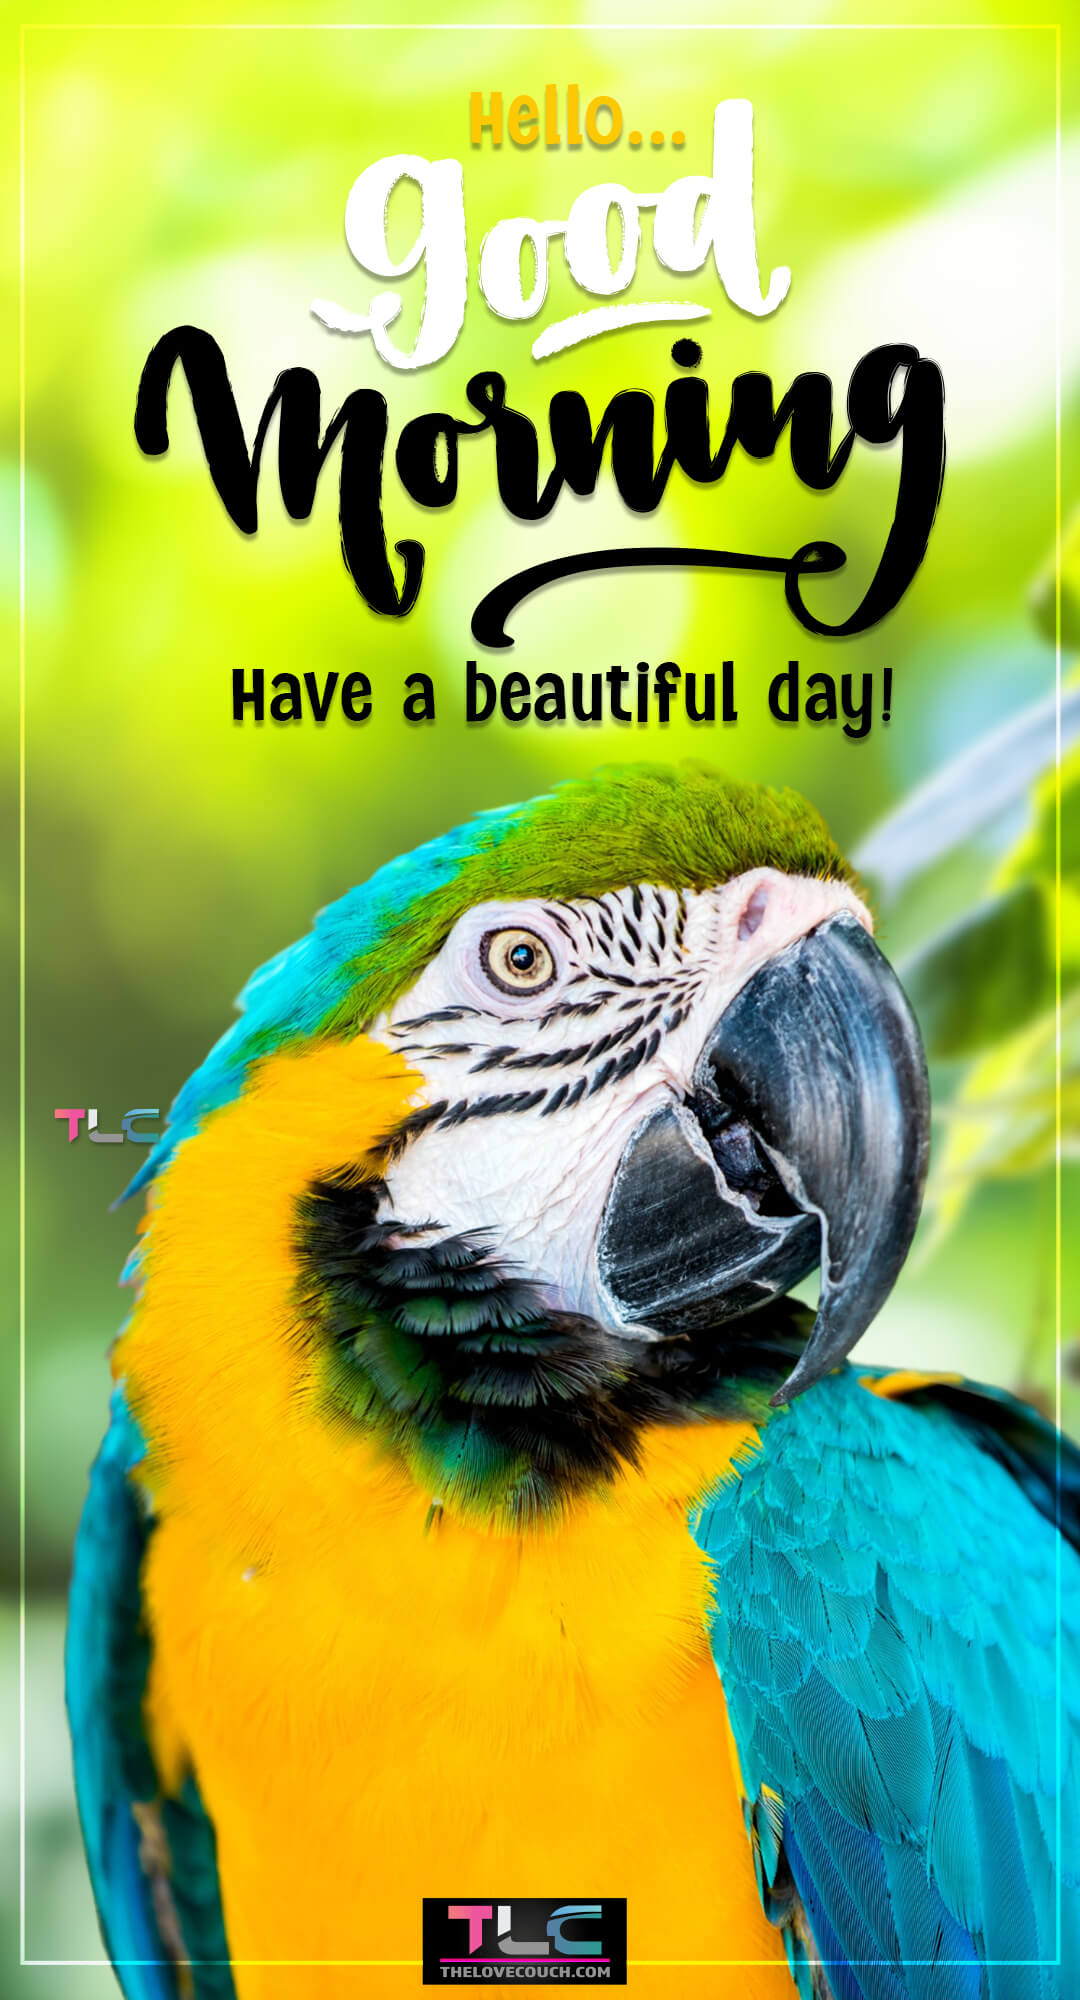 Good Morning Images - Beautiful parrot portrait shot - Have a beautiful day